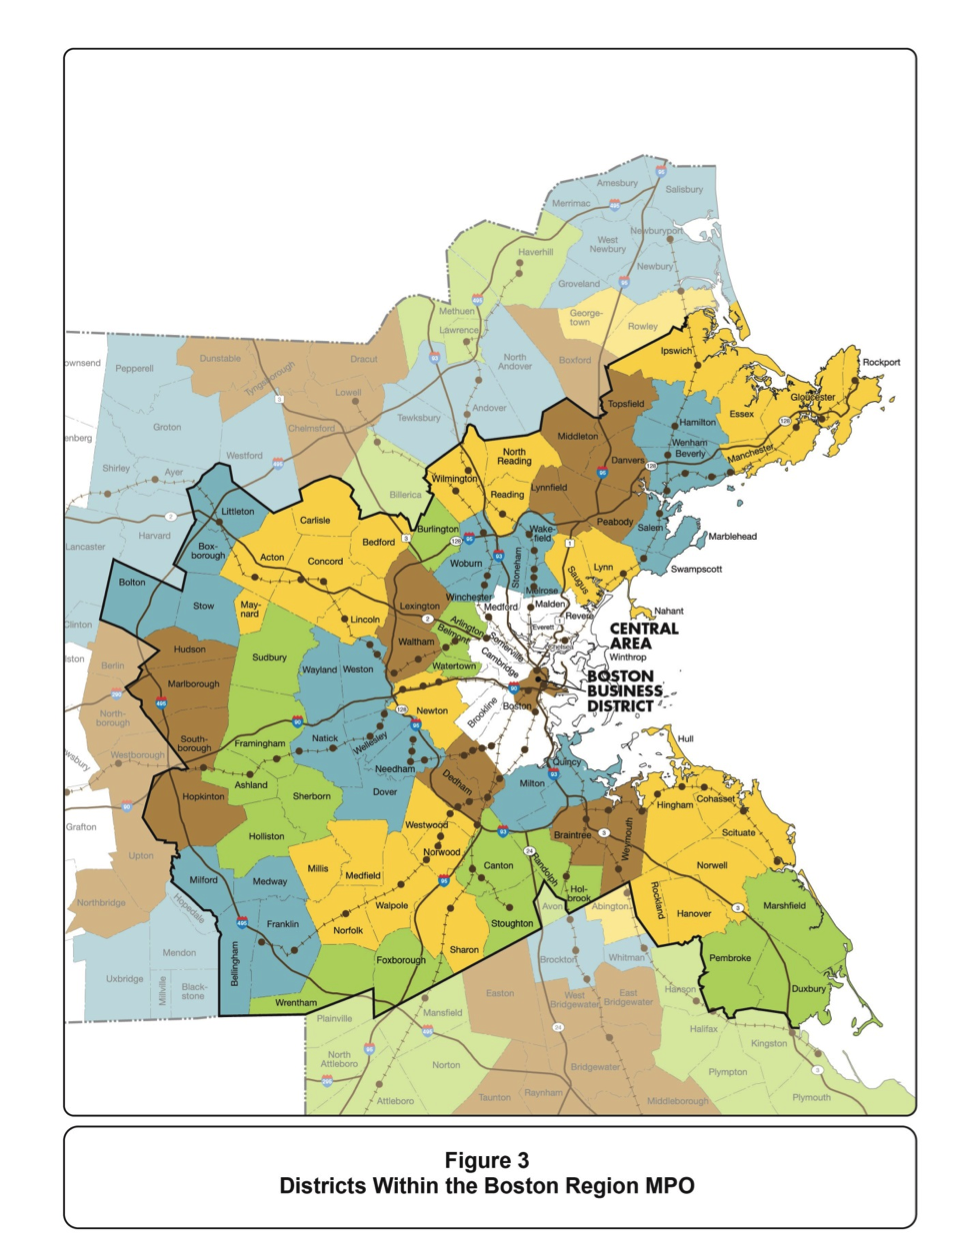 Figure 3-3 is a map of the districts within the Boston Region MPO which are used to describe inter- and intra-district trip flows.